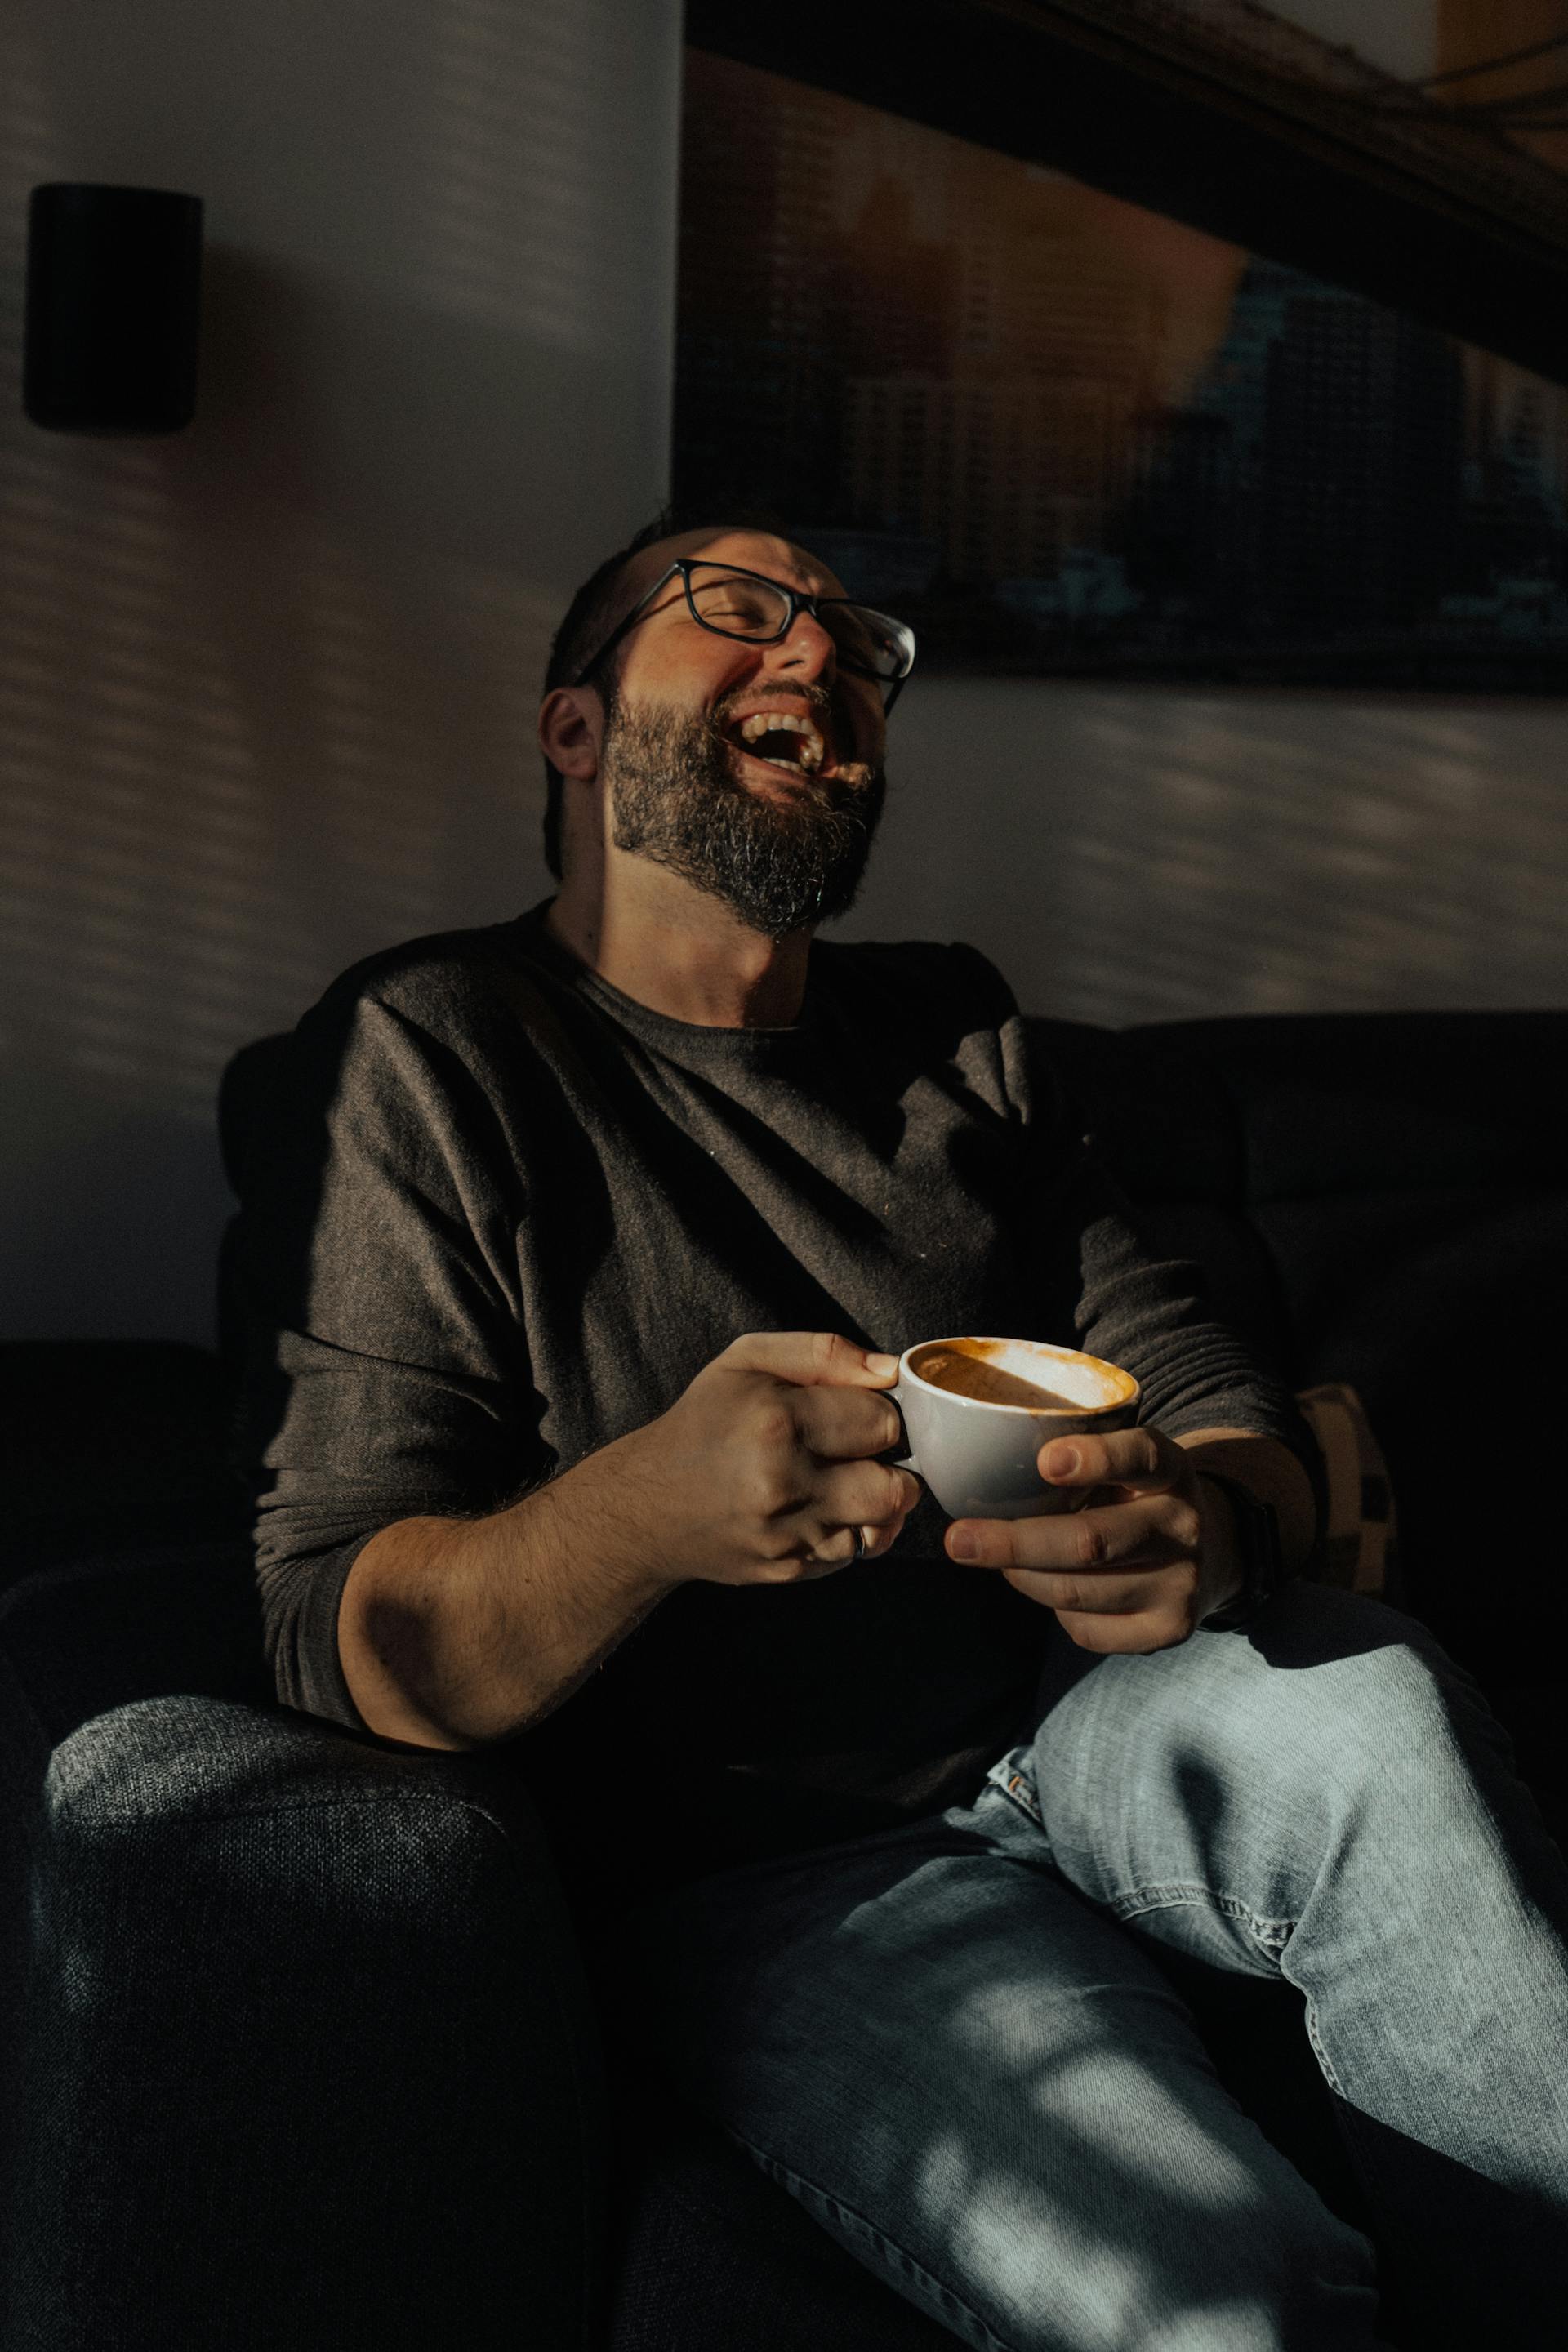 A man laughing while holding a cup of coffee | Source: Pexels